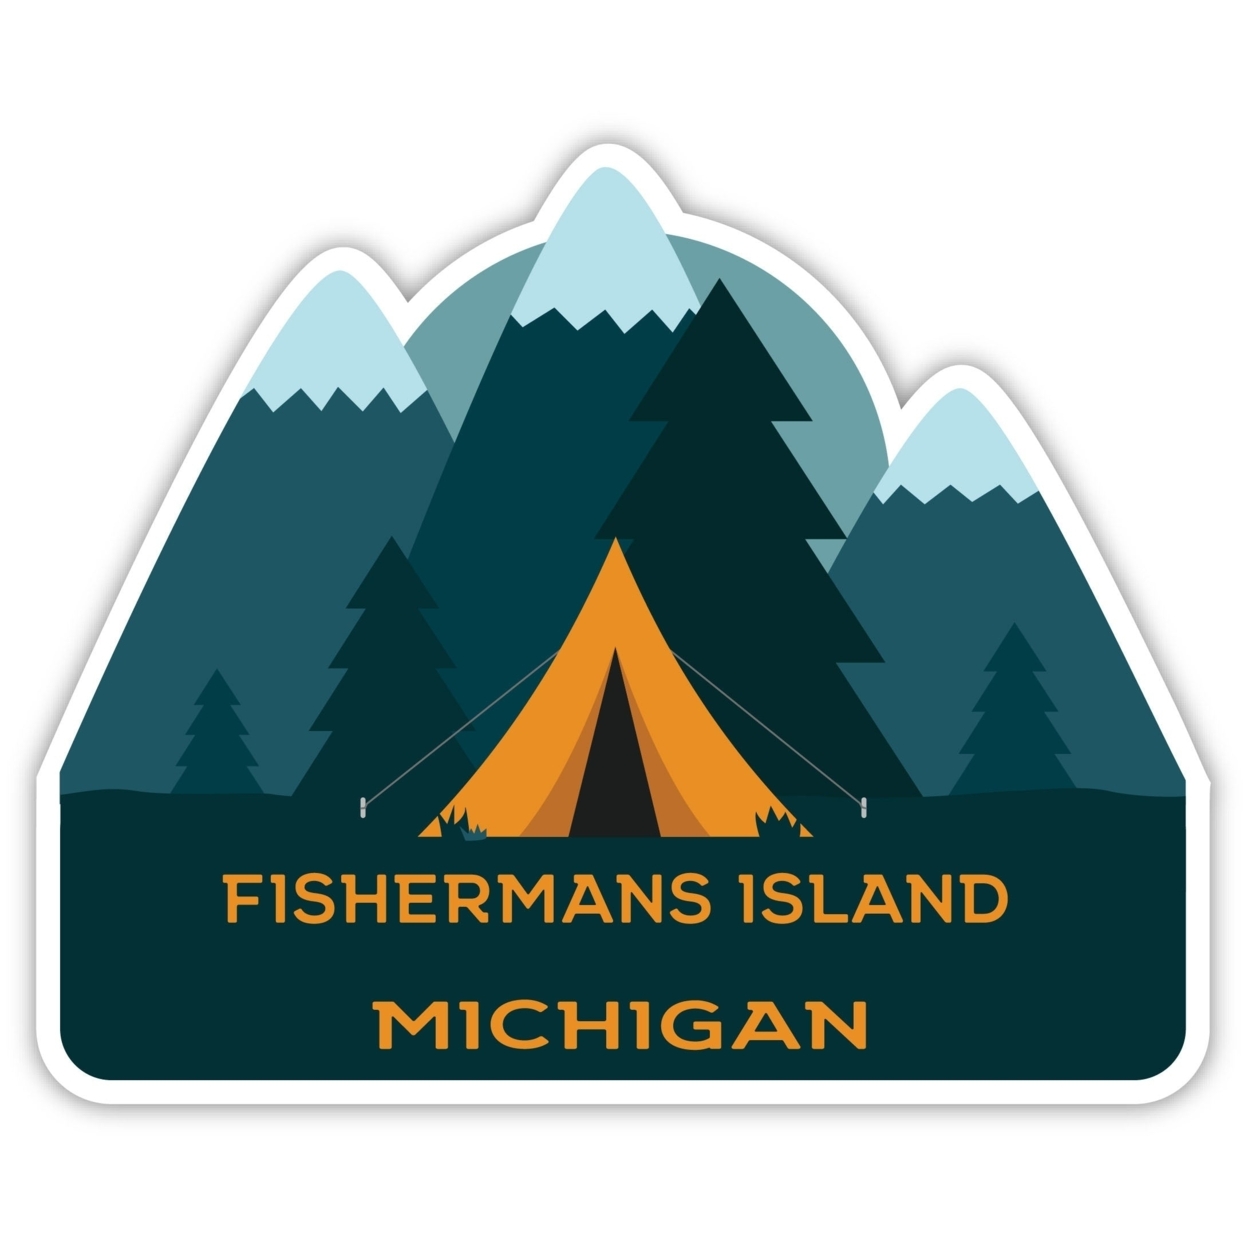 Fishermans Island Michigan Souvenir Decorative Stickers (Choose Theme And Size) - 4-Pack, 6-Inch, Tent